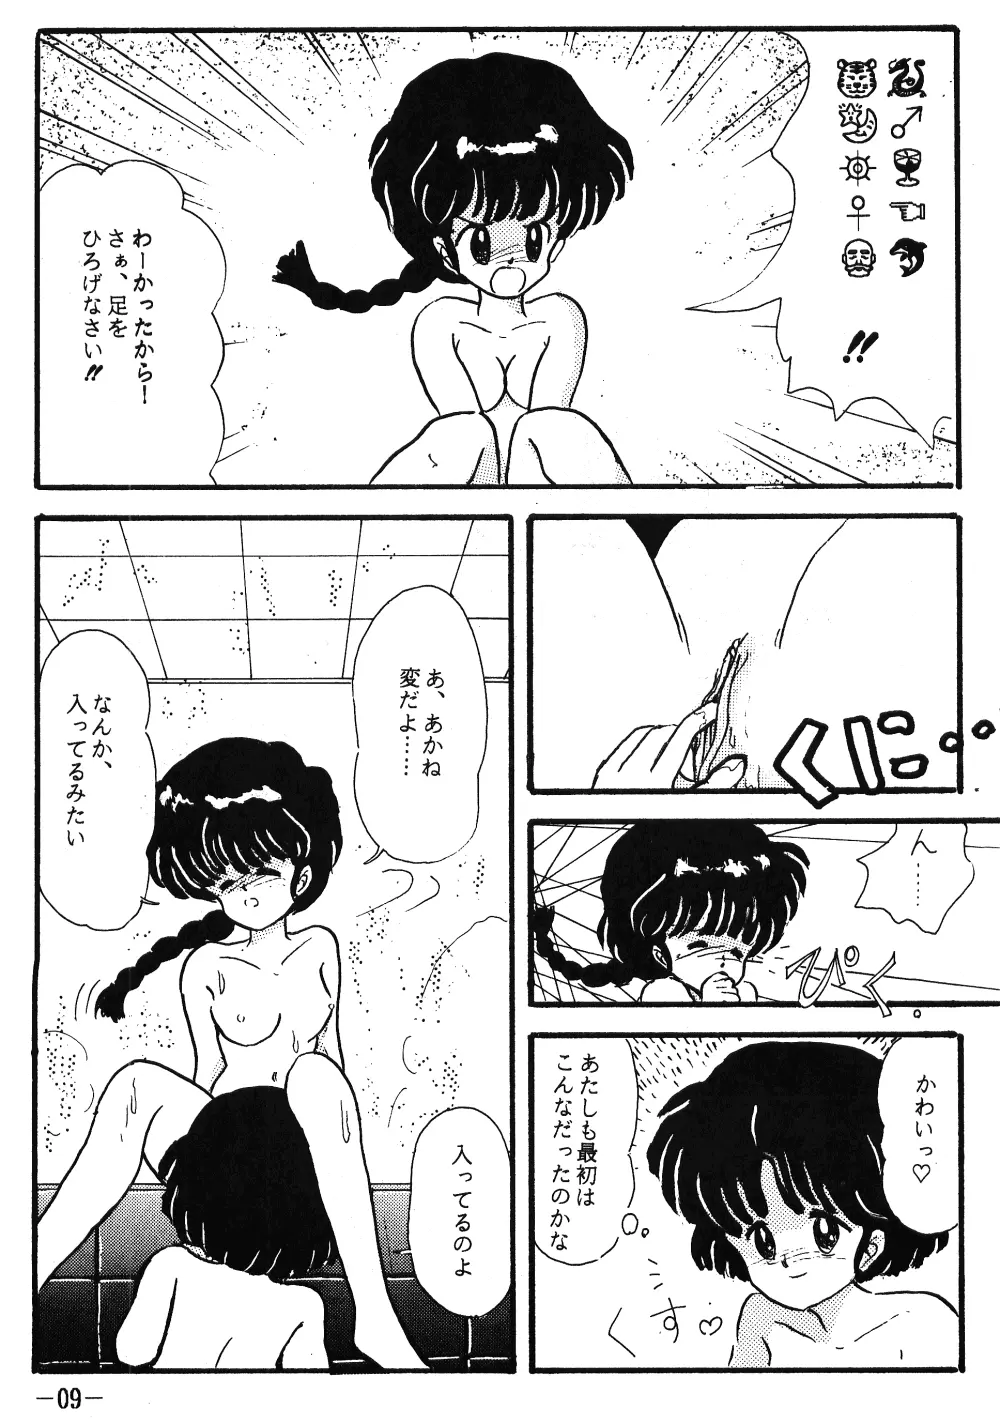 Fro2 Fight Vol. 1 Page.9